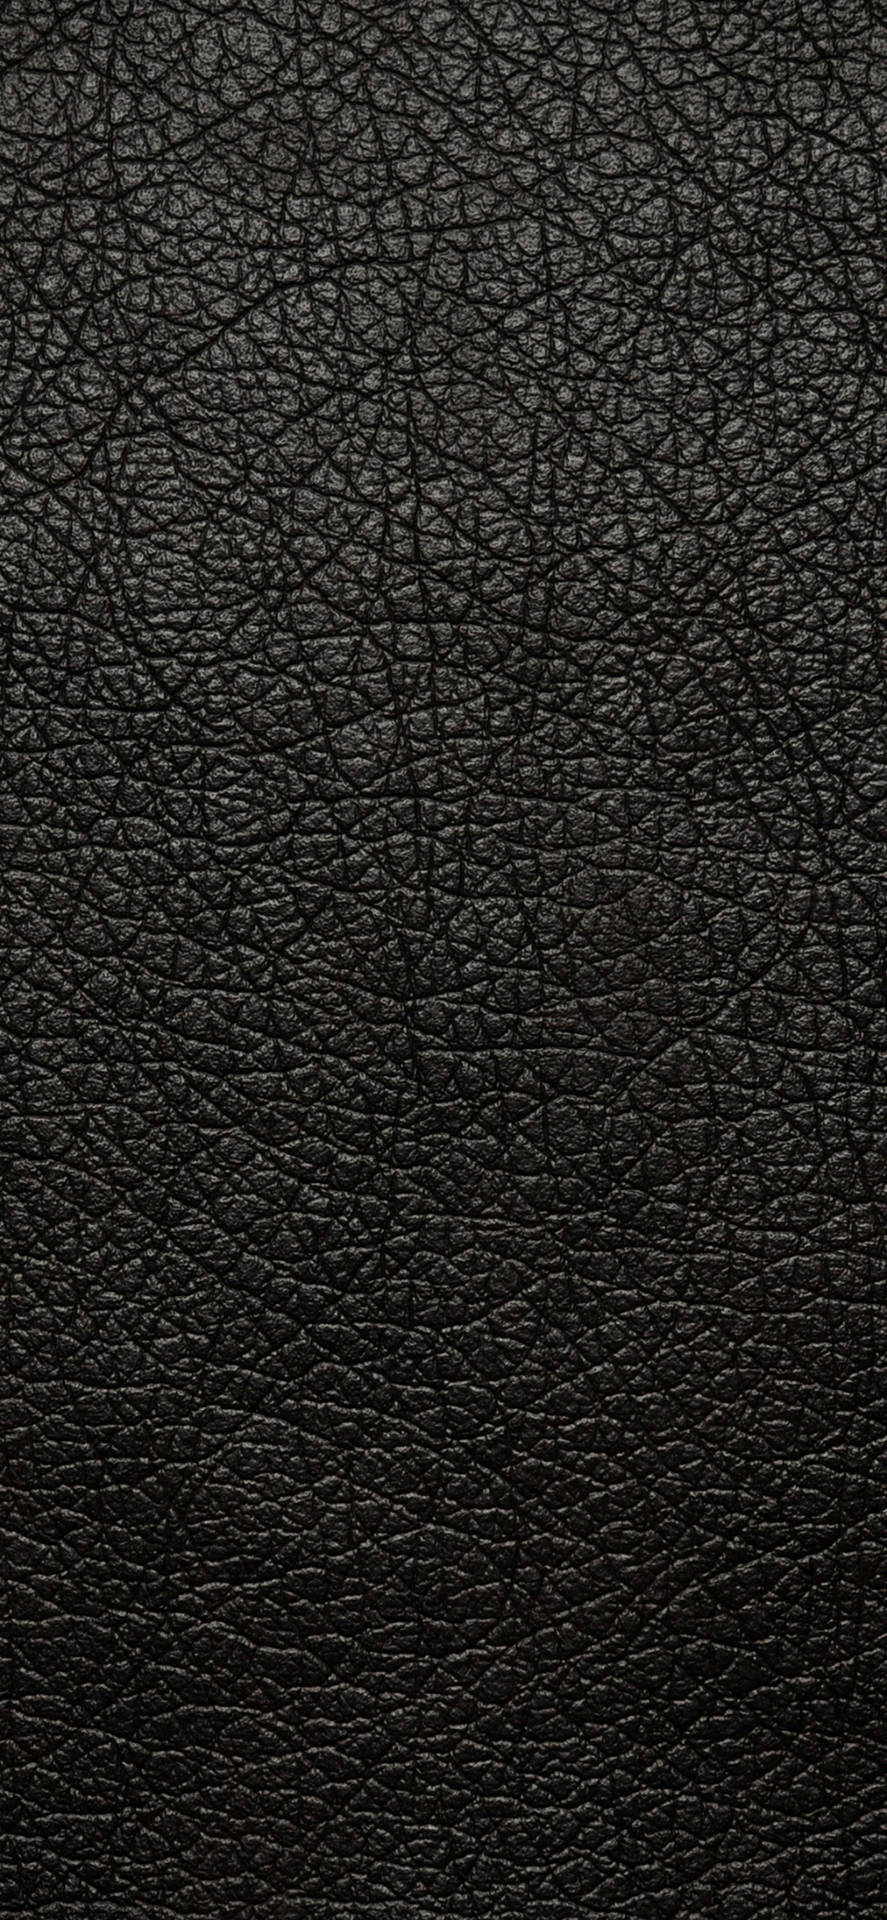 Car Seat Cover In Black Leather iPhone Wallpaper